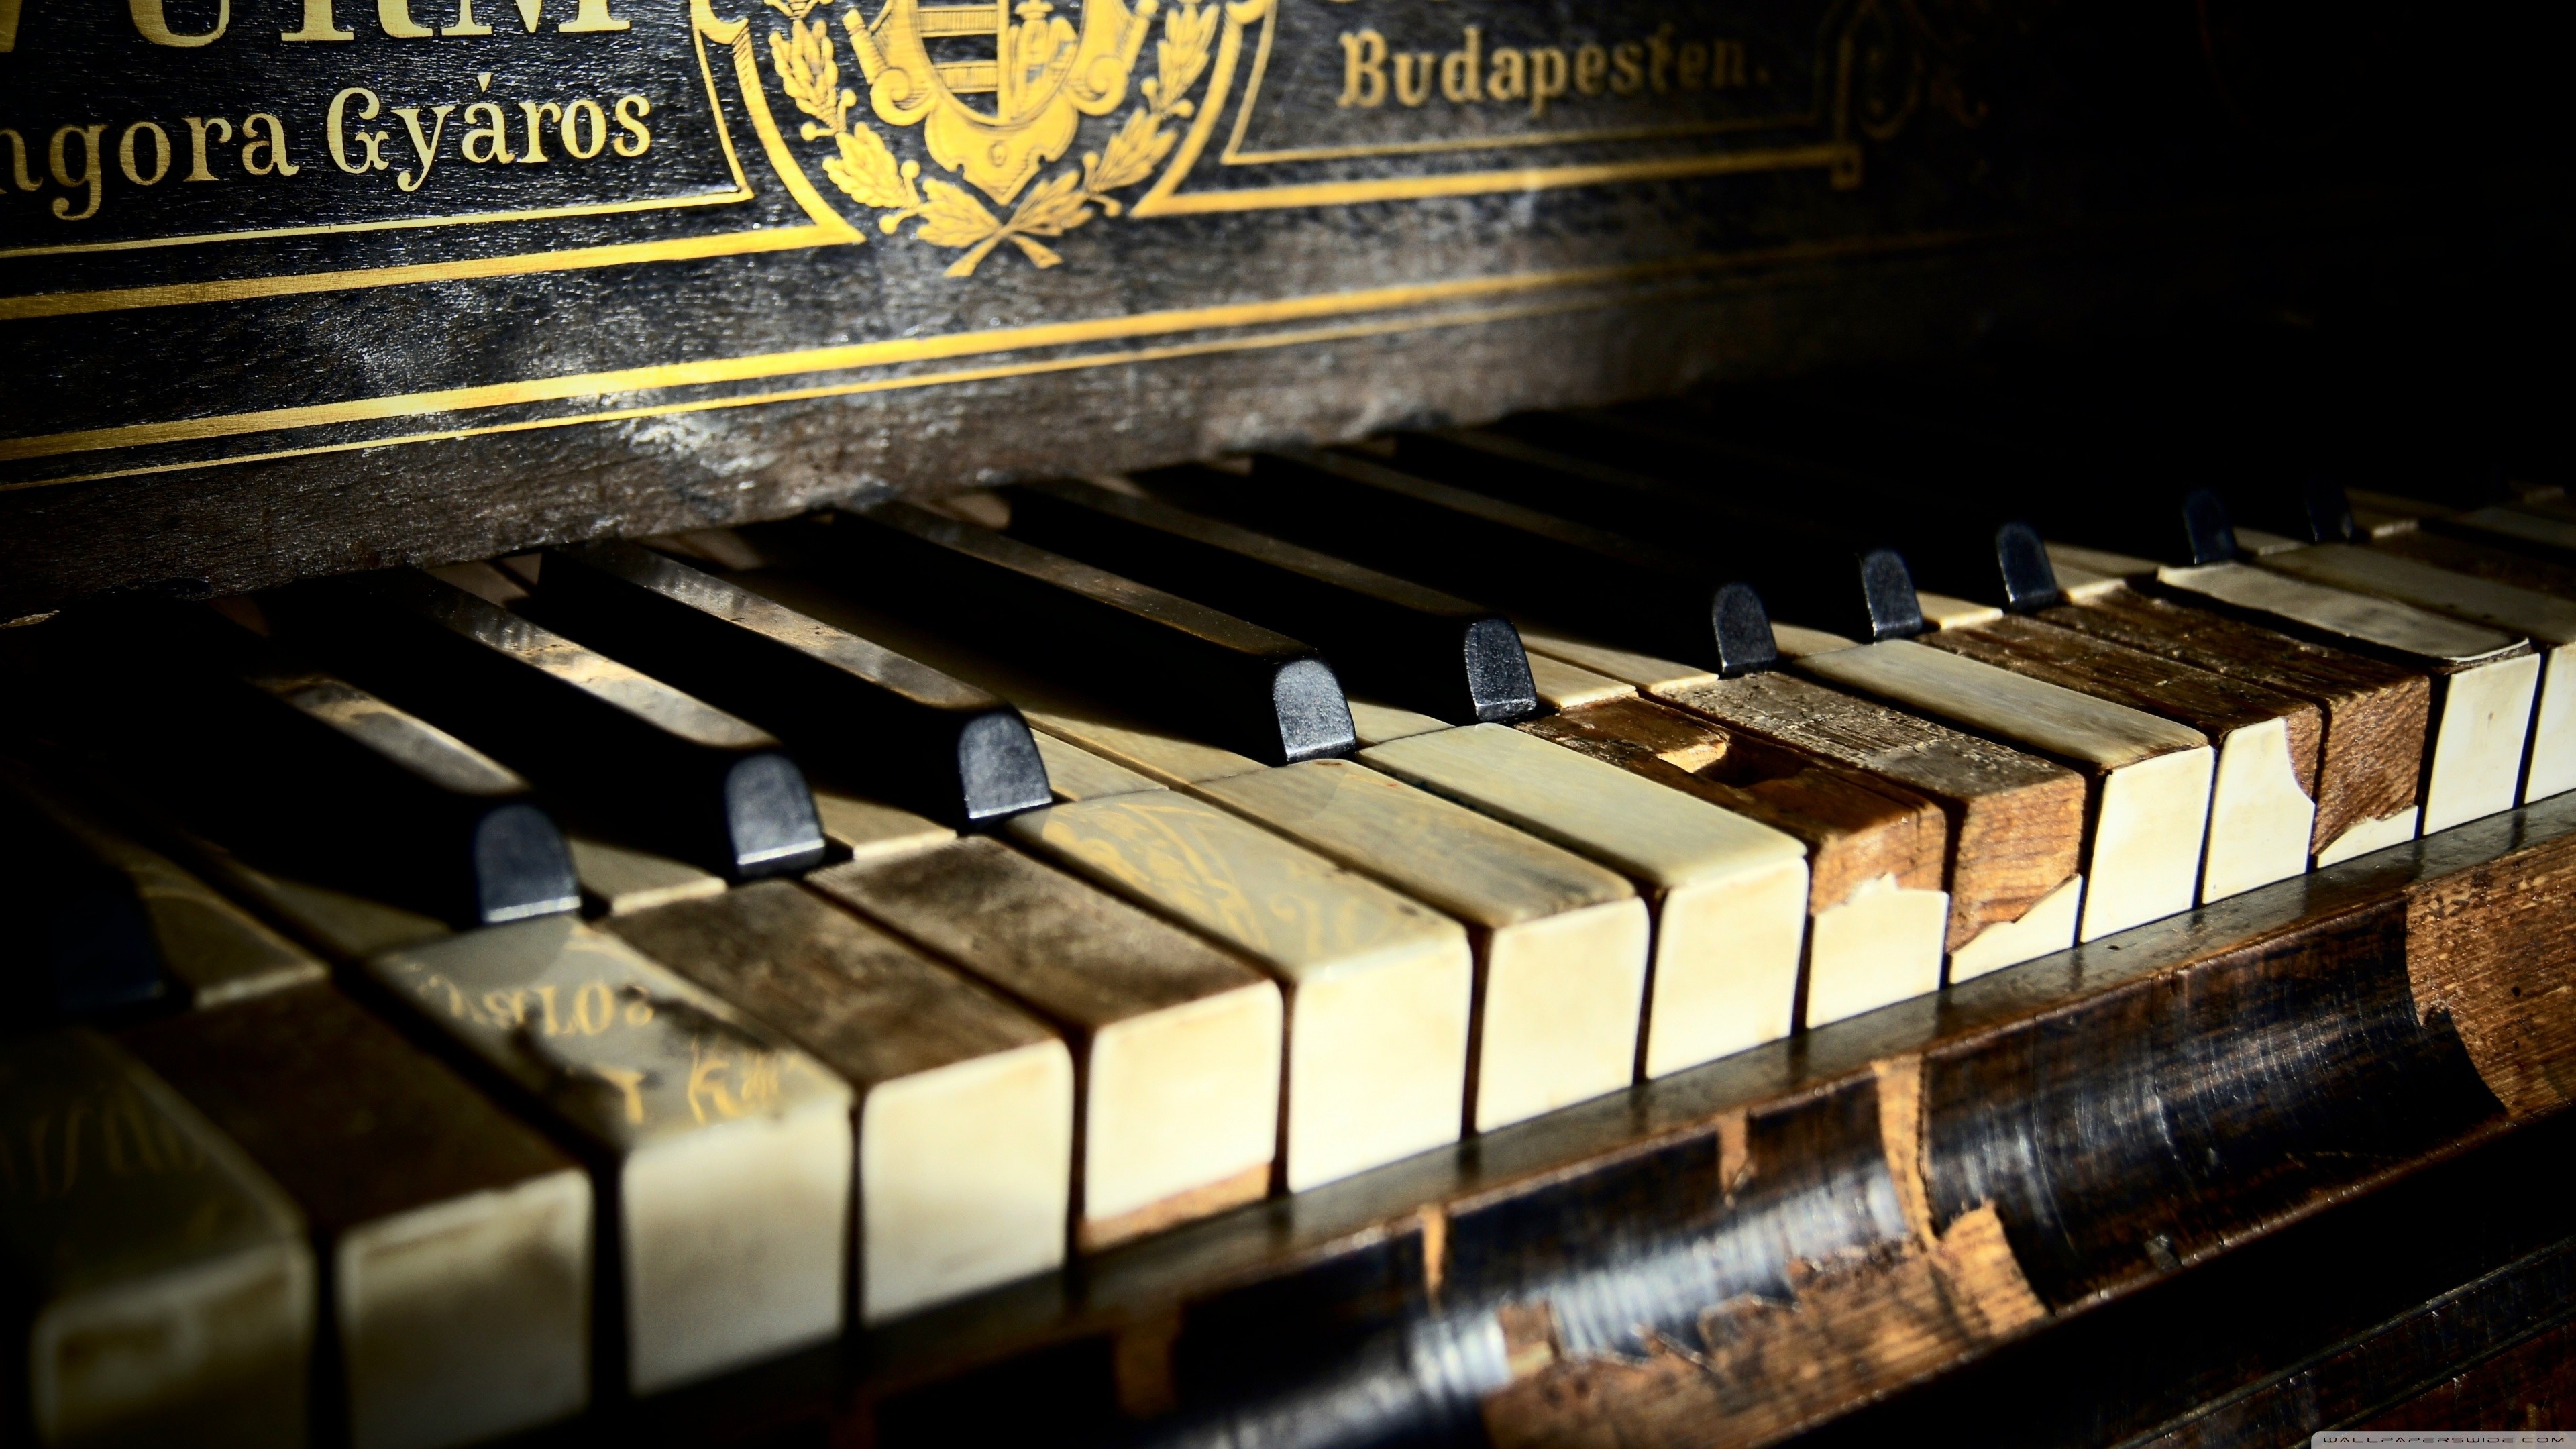 3840x2160 Old piano